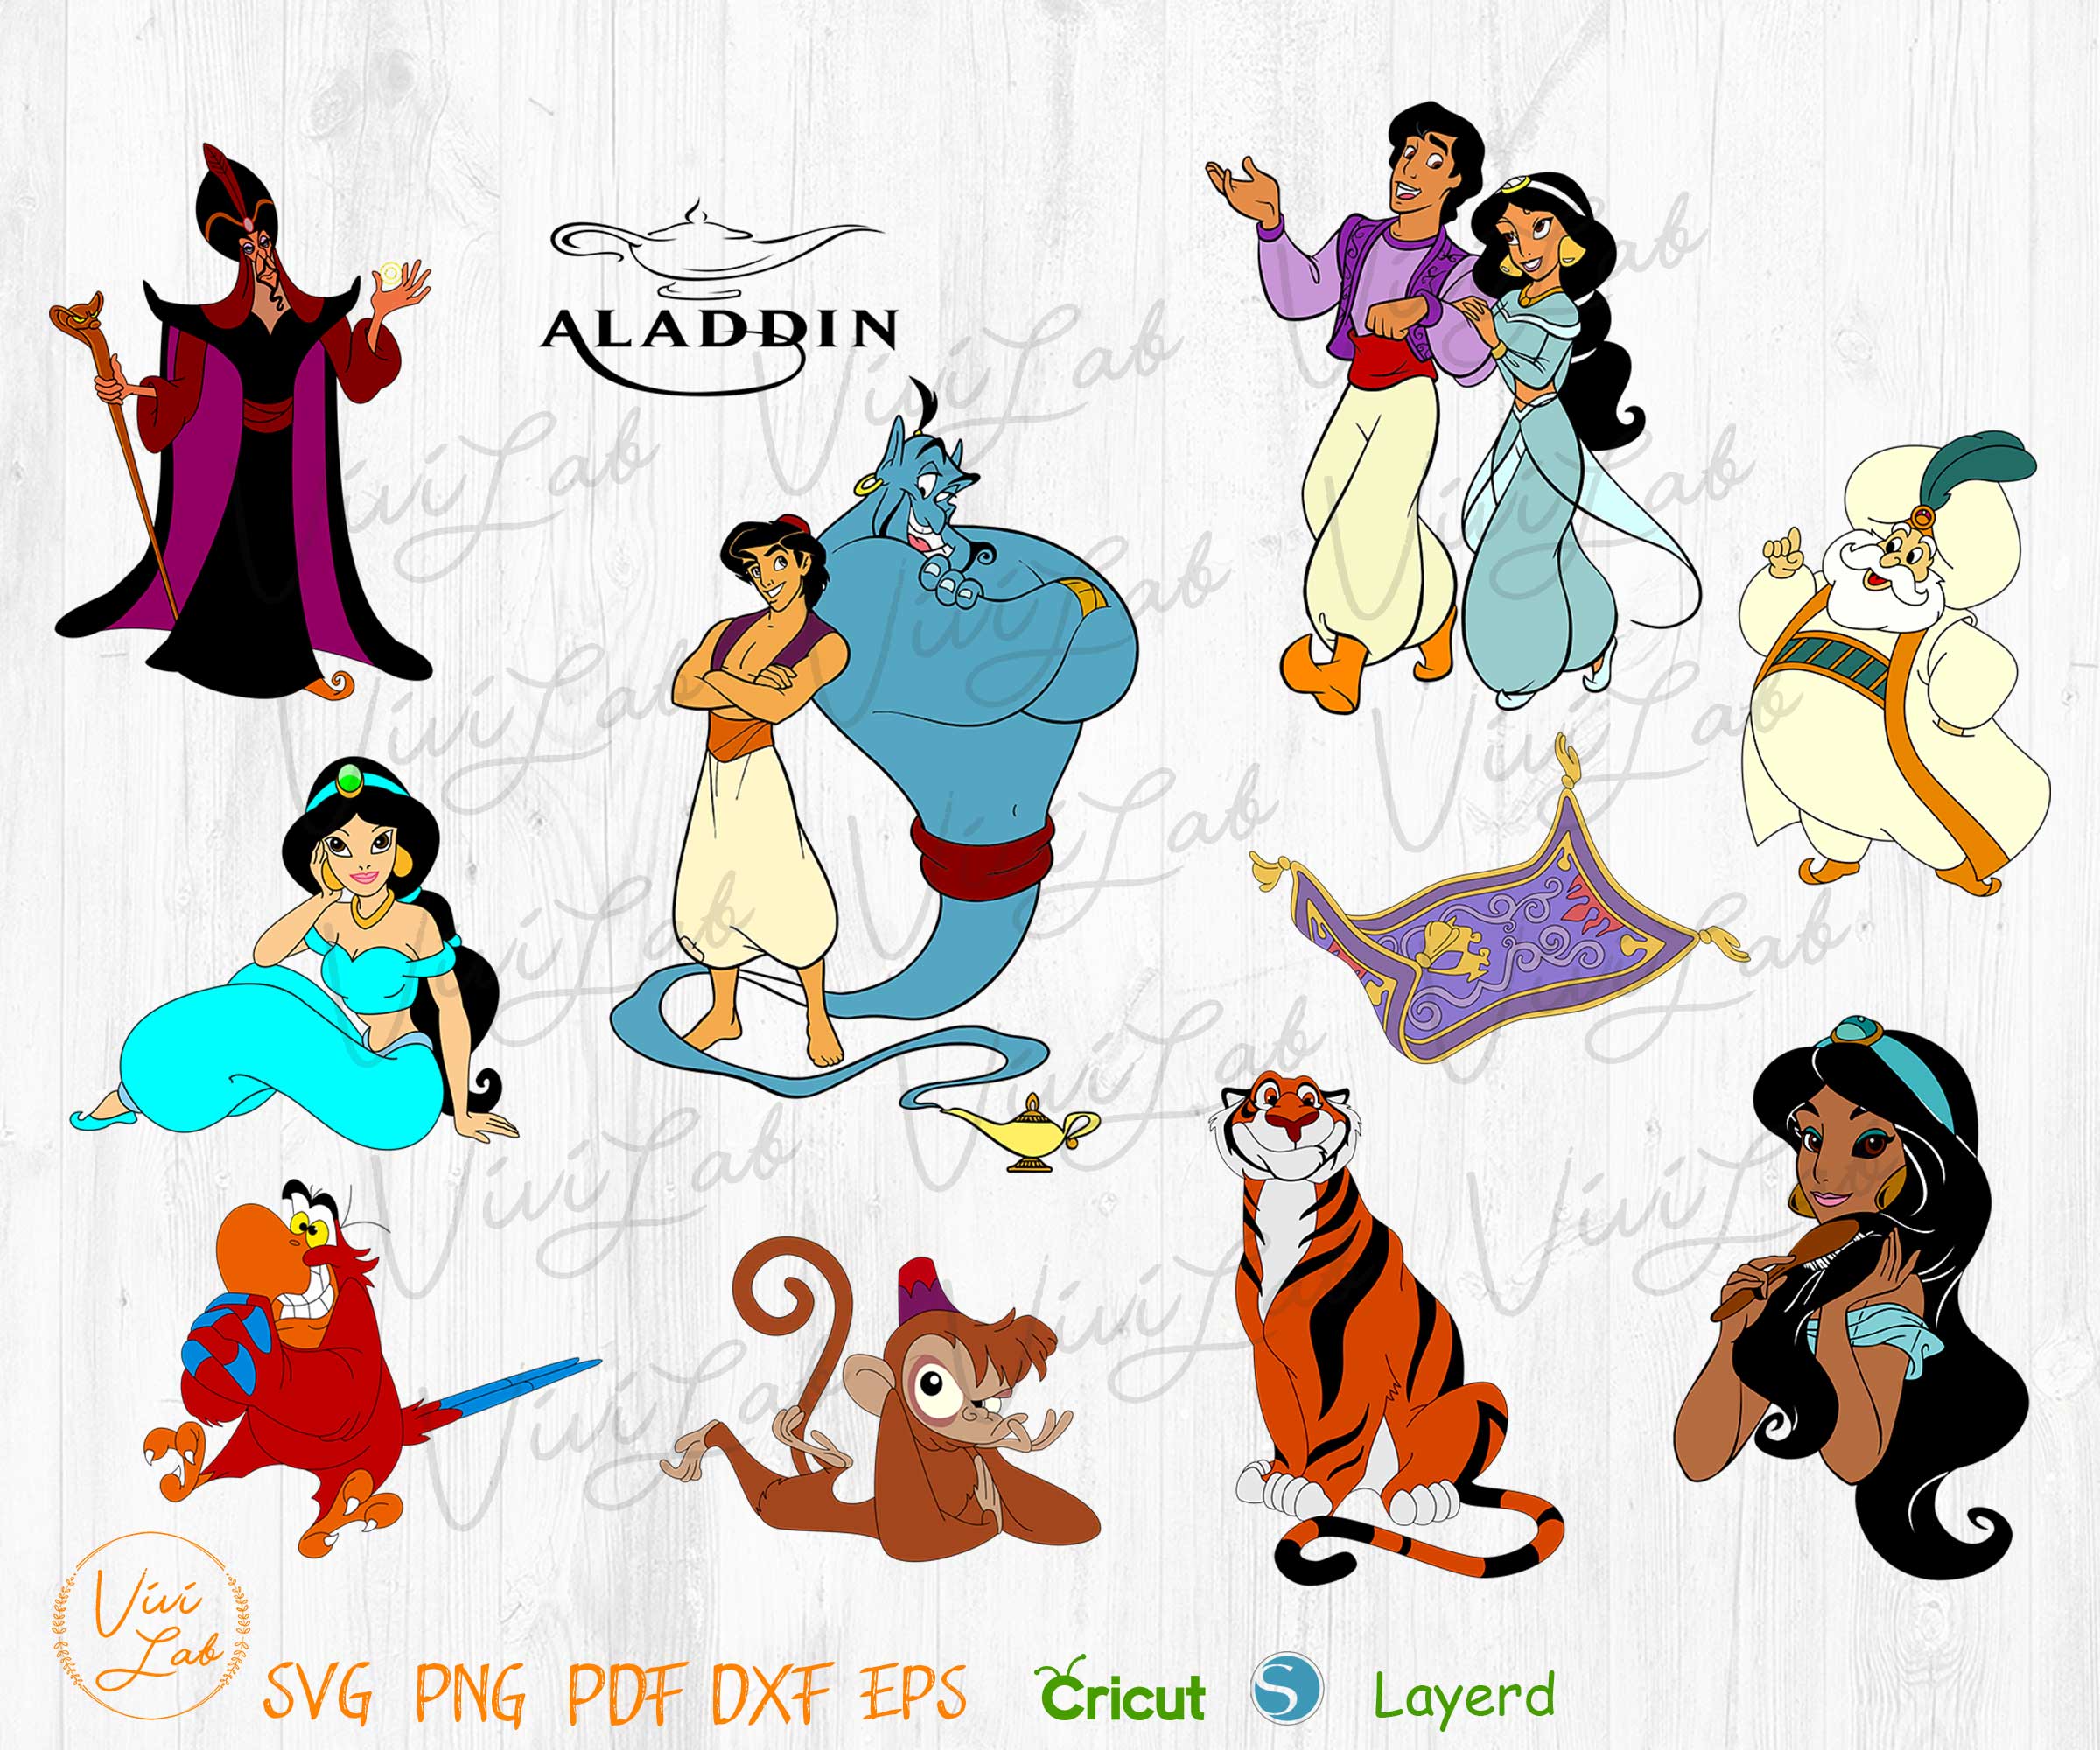 Aladdin anime clipart svg png vector